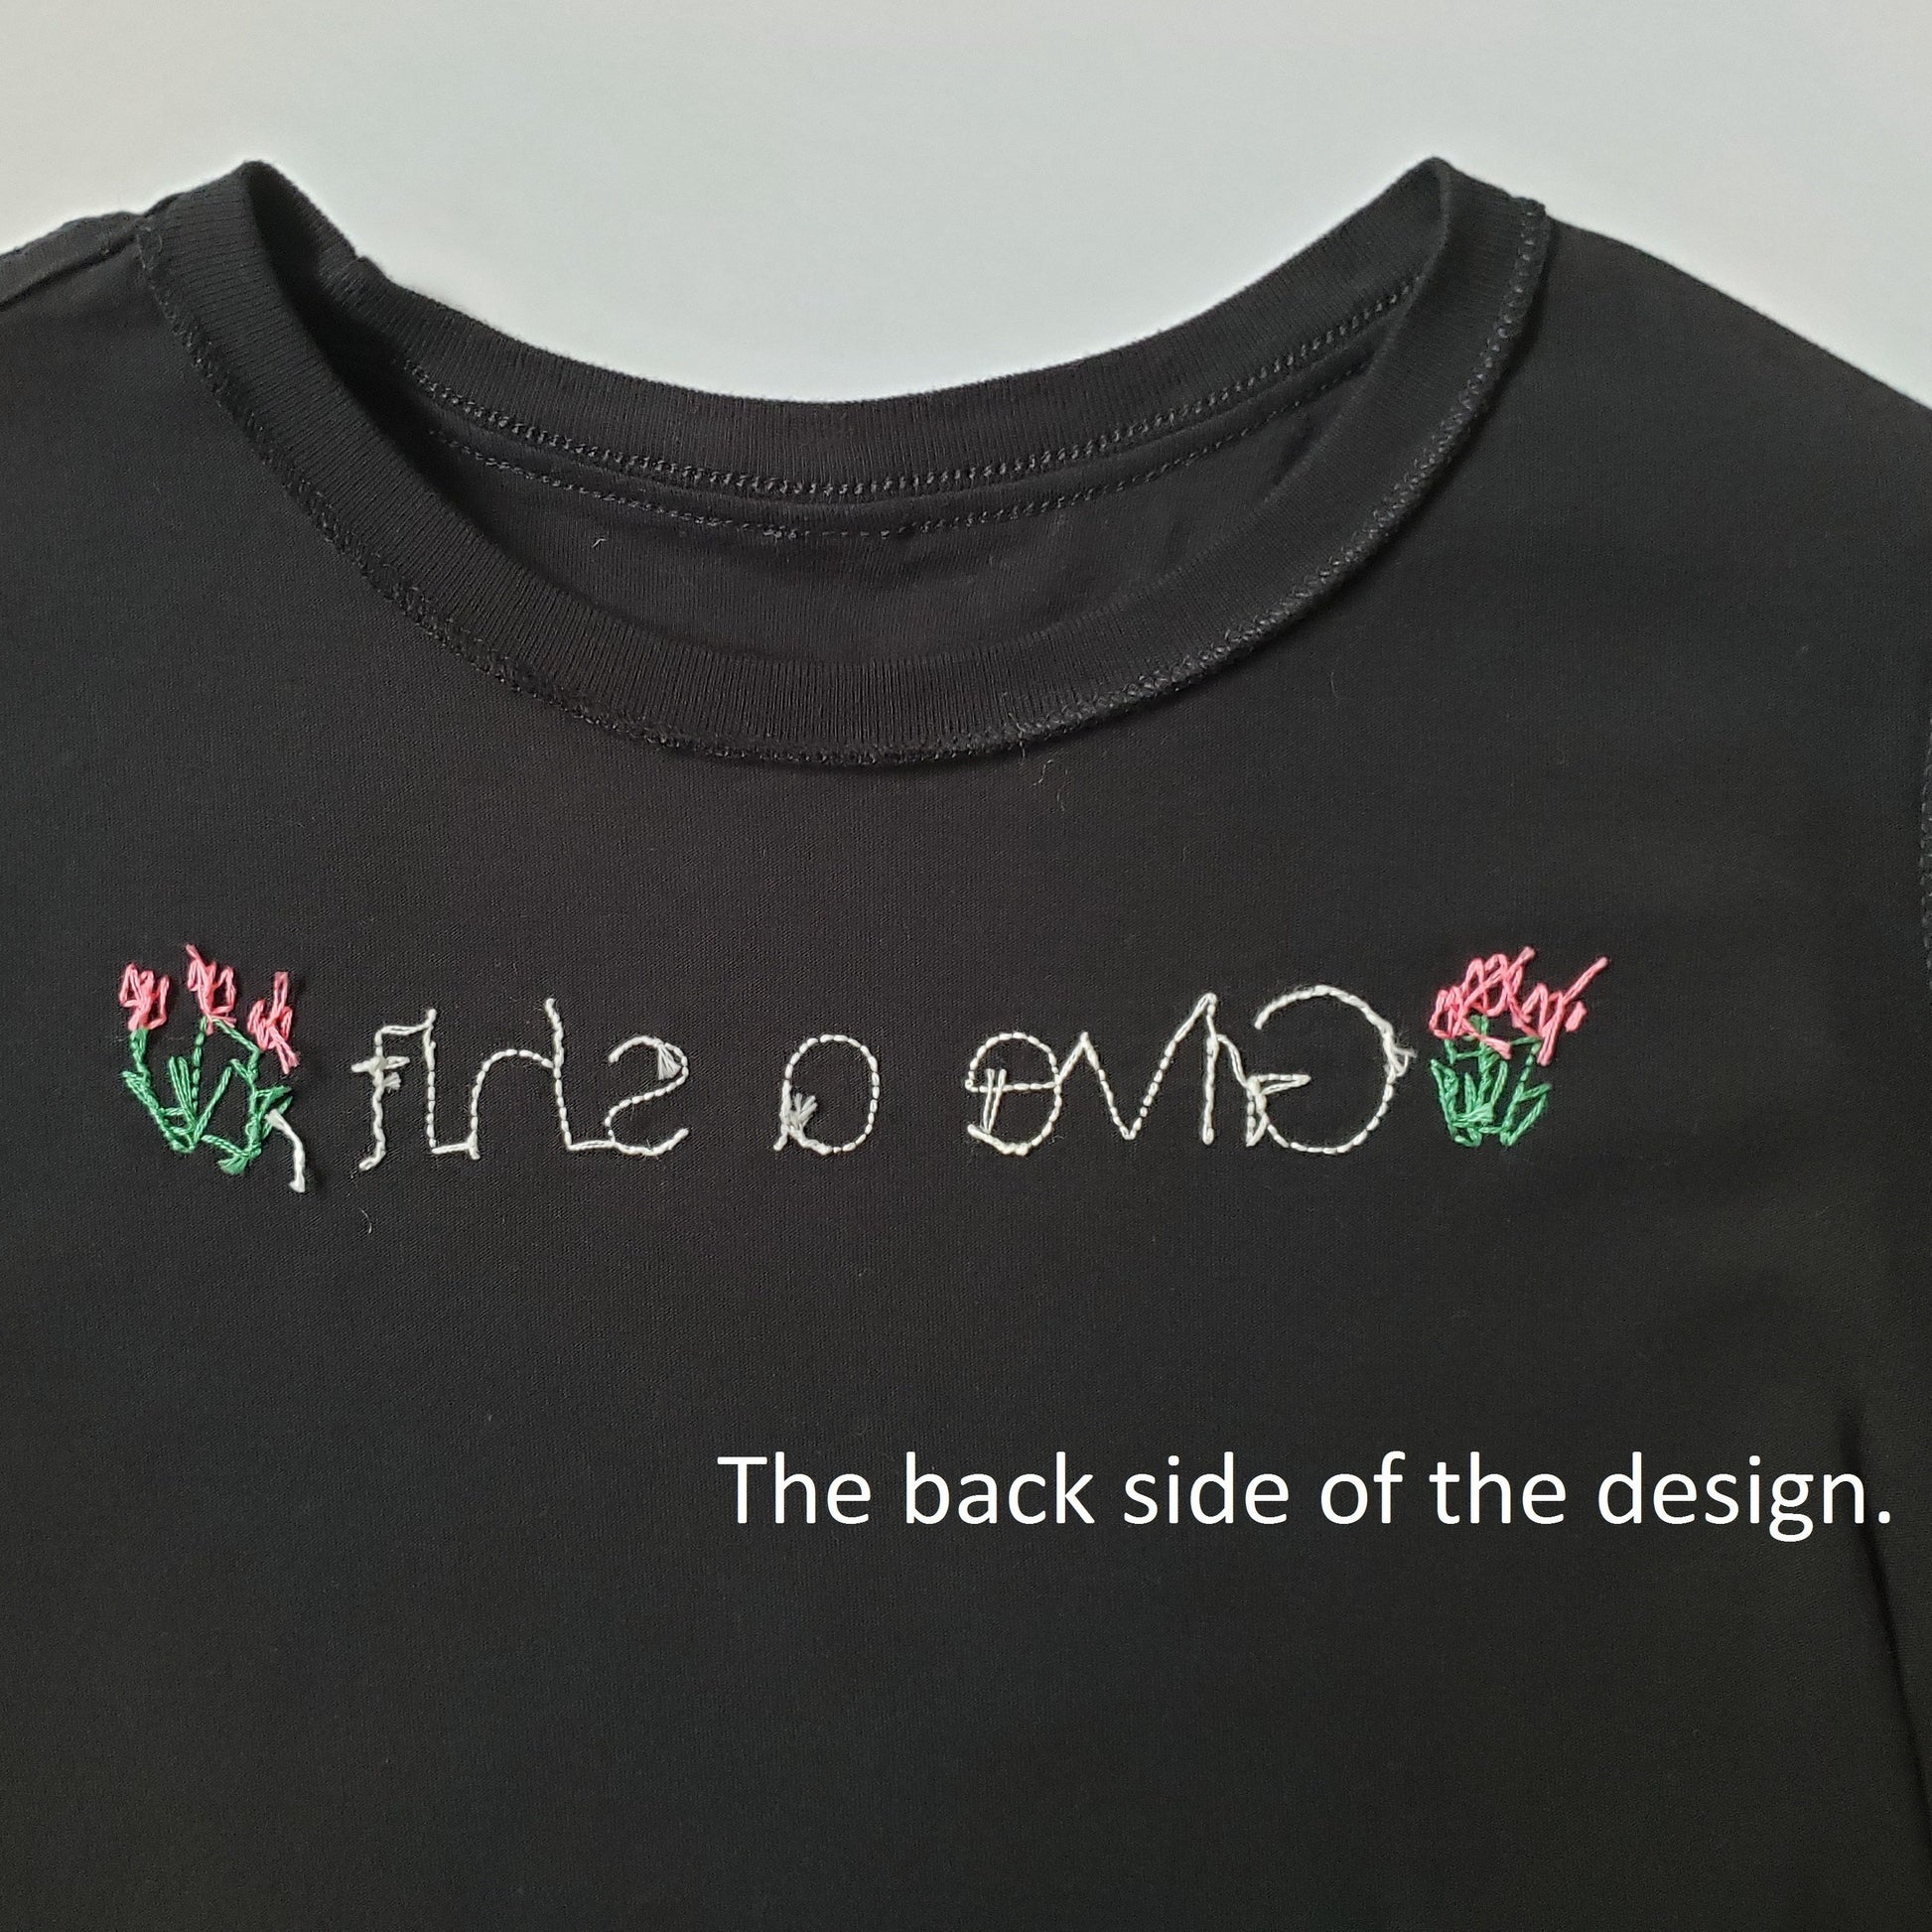 The back side of the design, included so folks can see how tidy the stitching is. You can see the lines are clean and there are no bundles of thread, just clean lines and "give a shit"  with two tulips. 